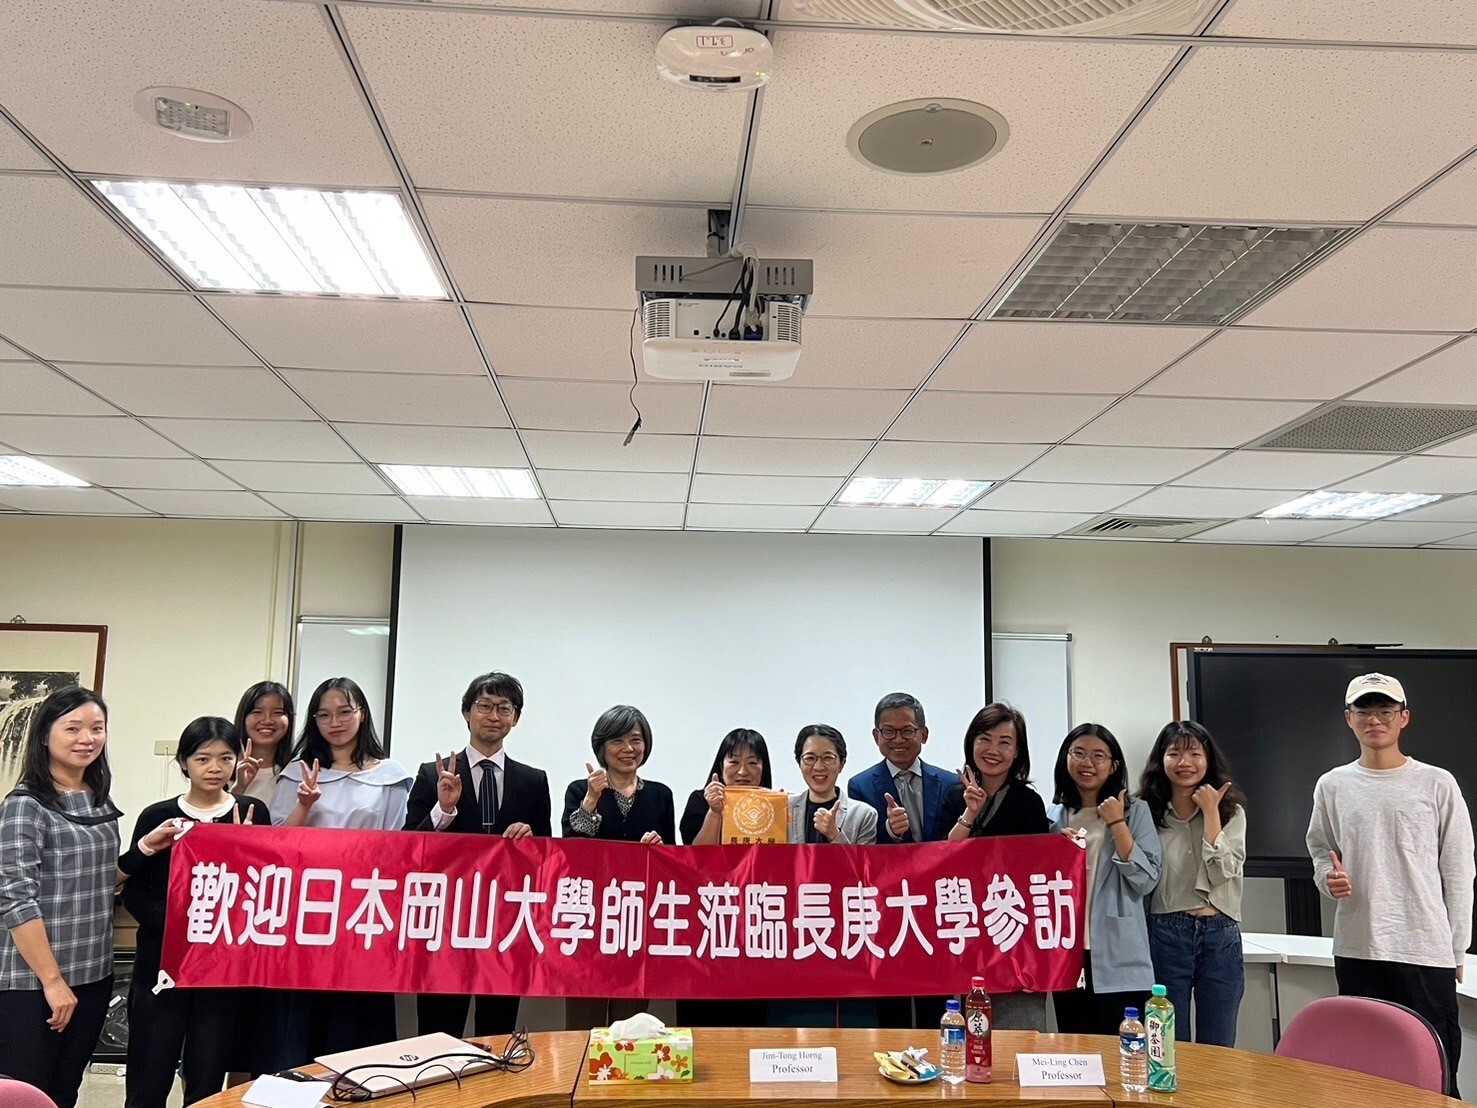 Welcome to the visit of professors and students from Okayama University, Japan